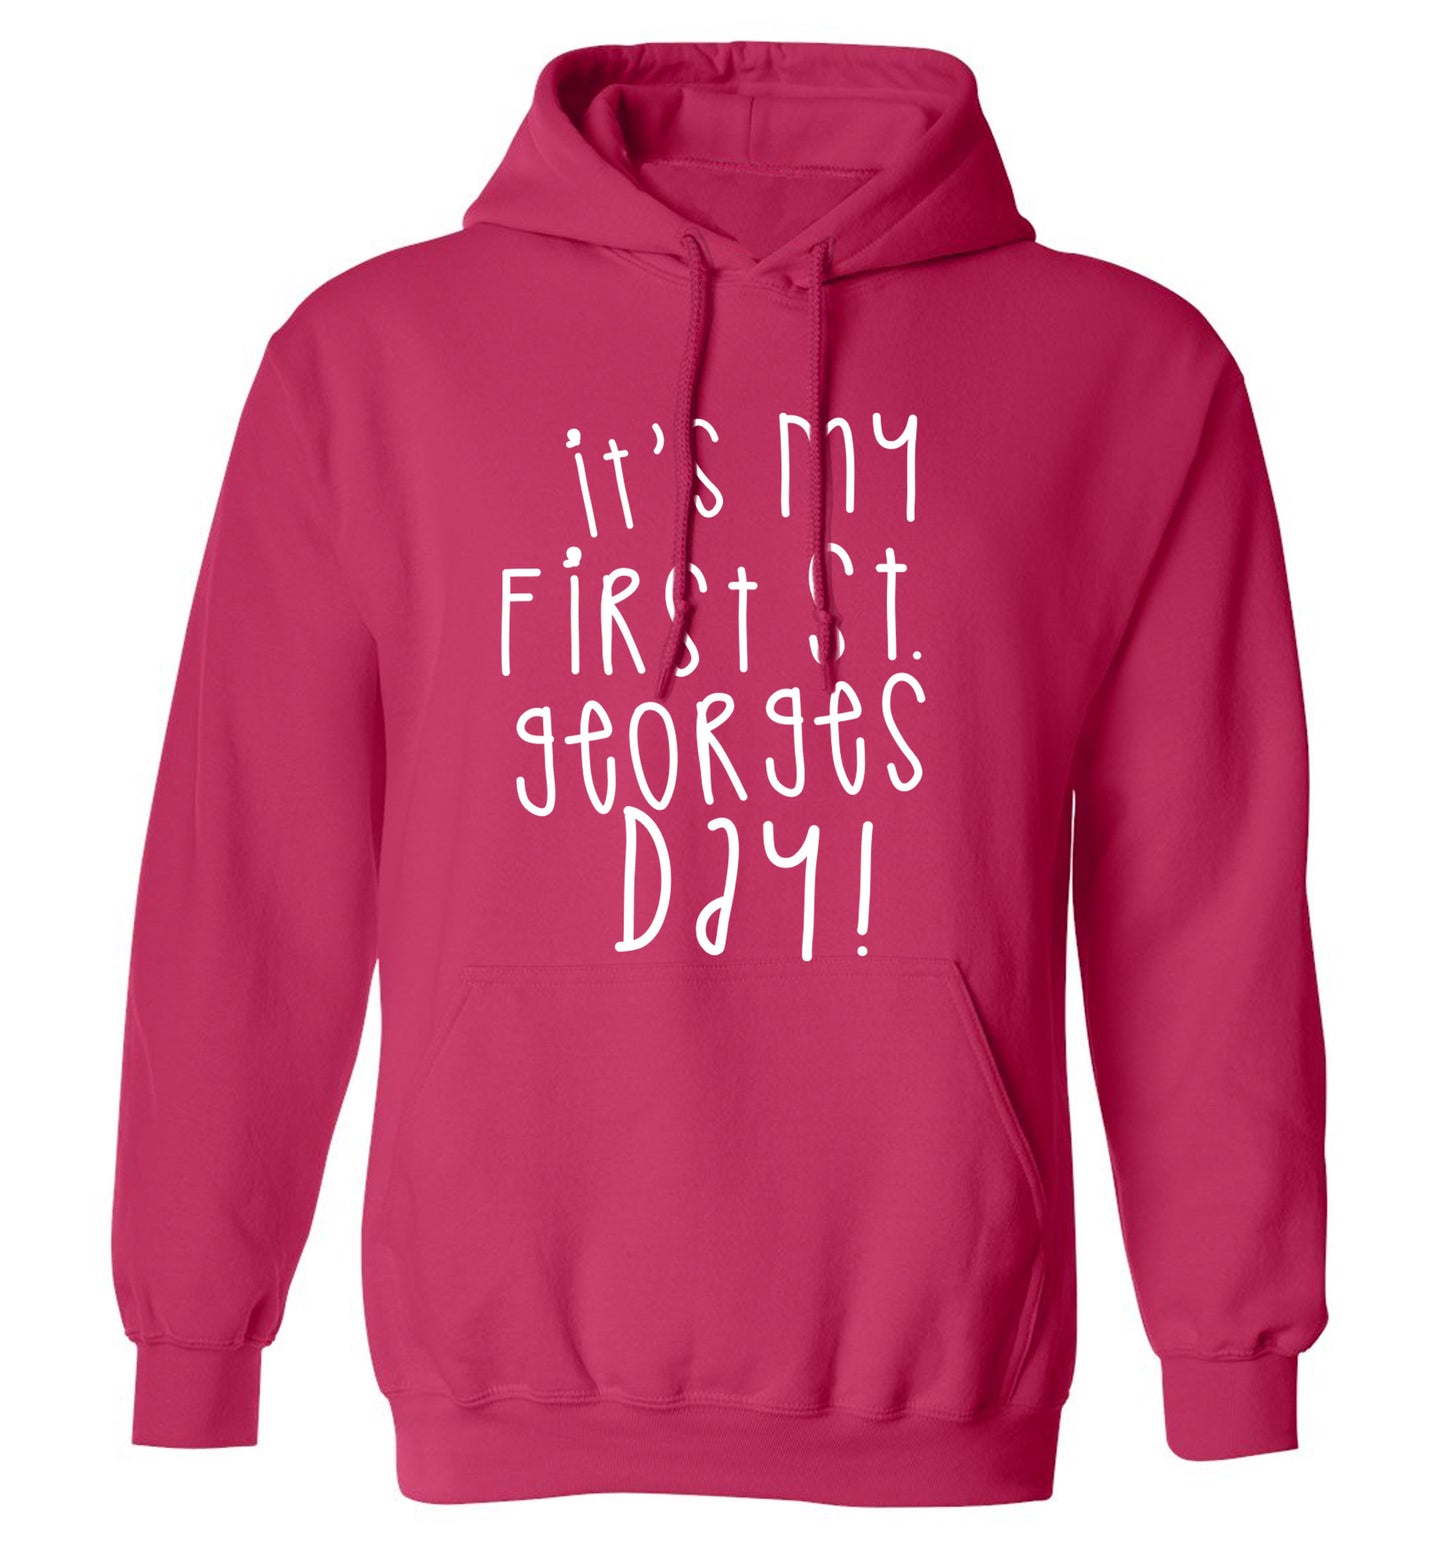 It's my first St Georges day adults unisex pink hoodie 2XL